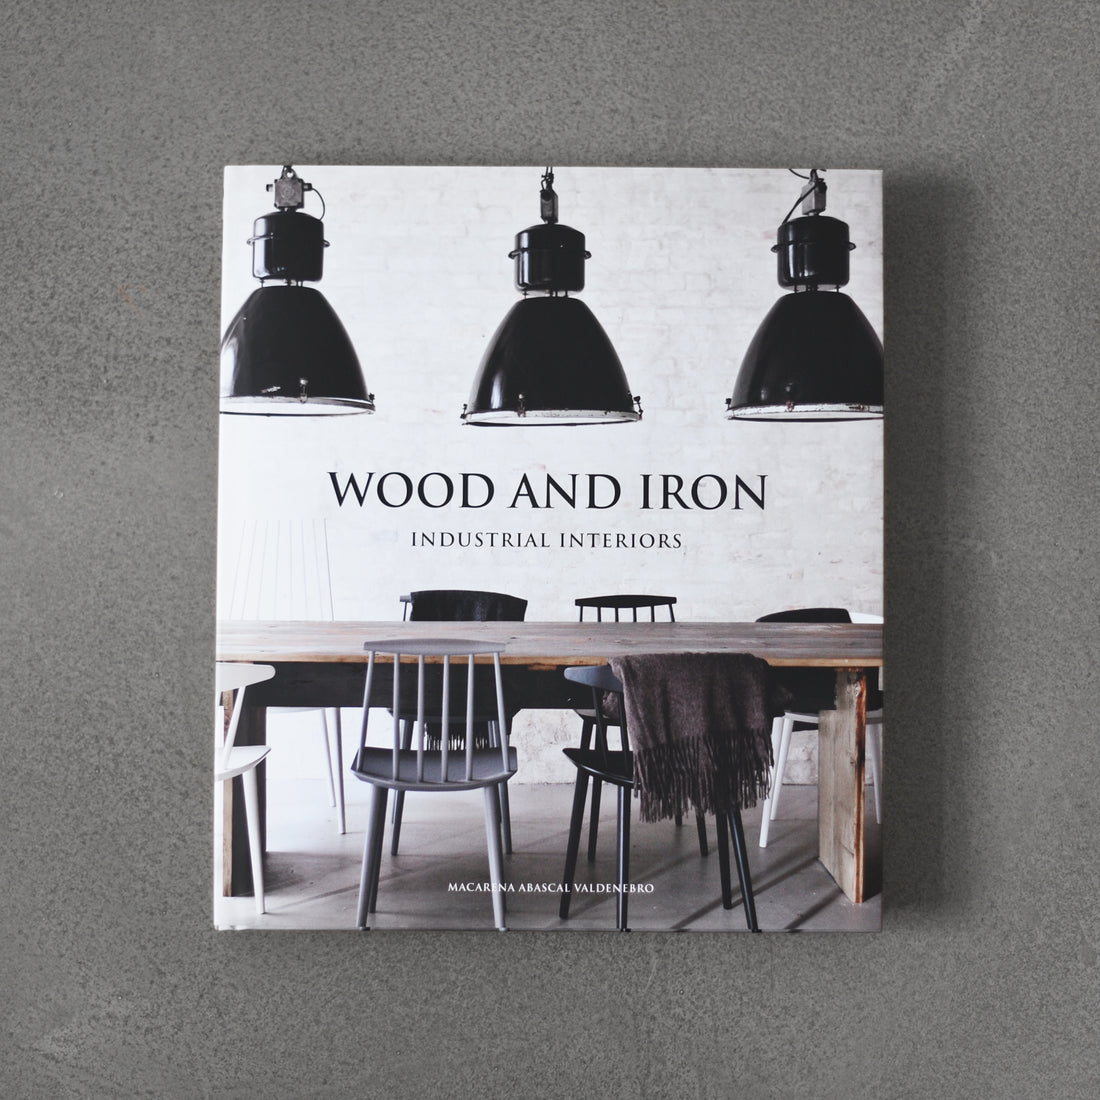 Wood and Iron: Industrial Interiors